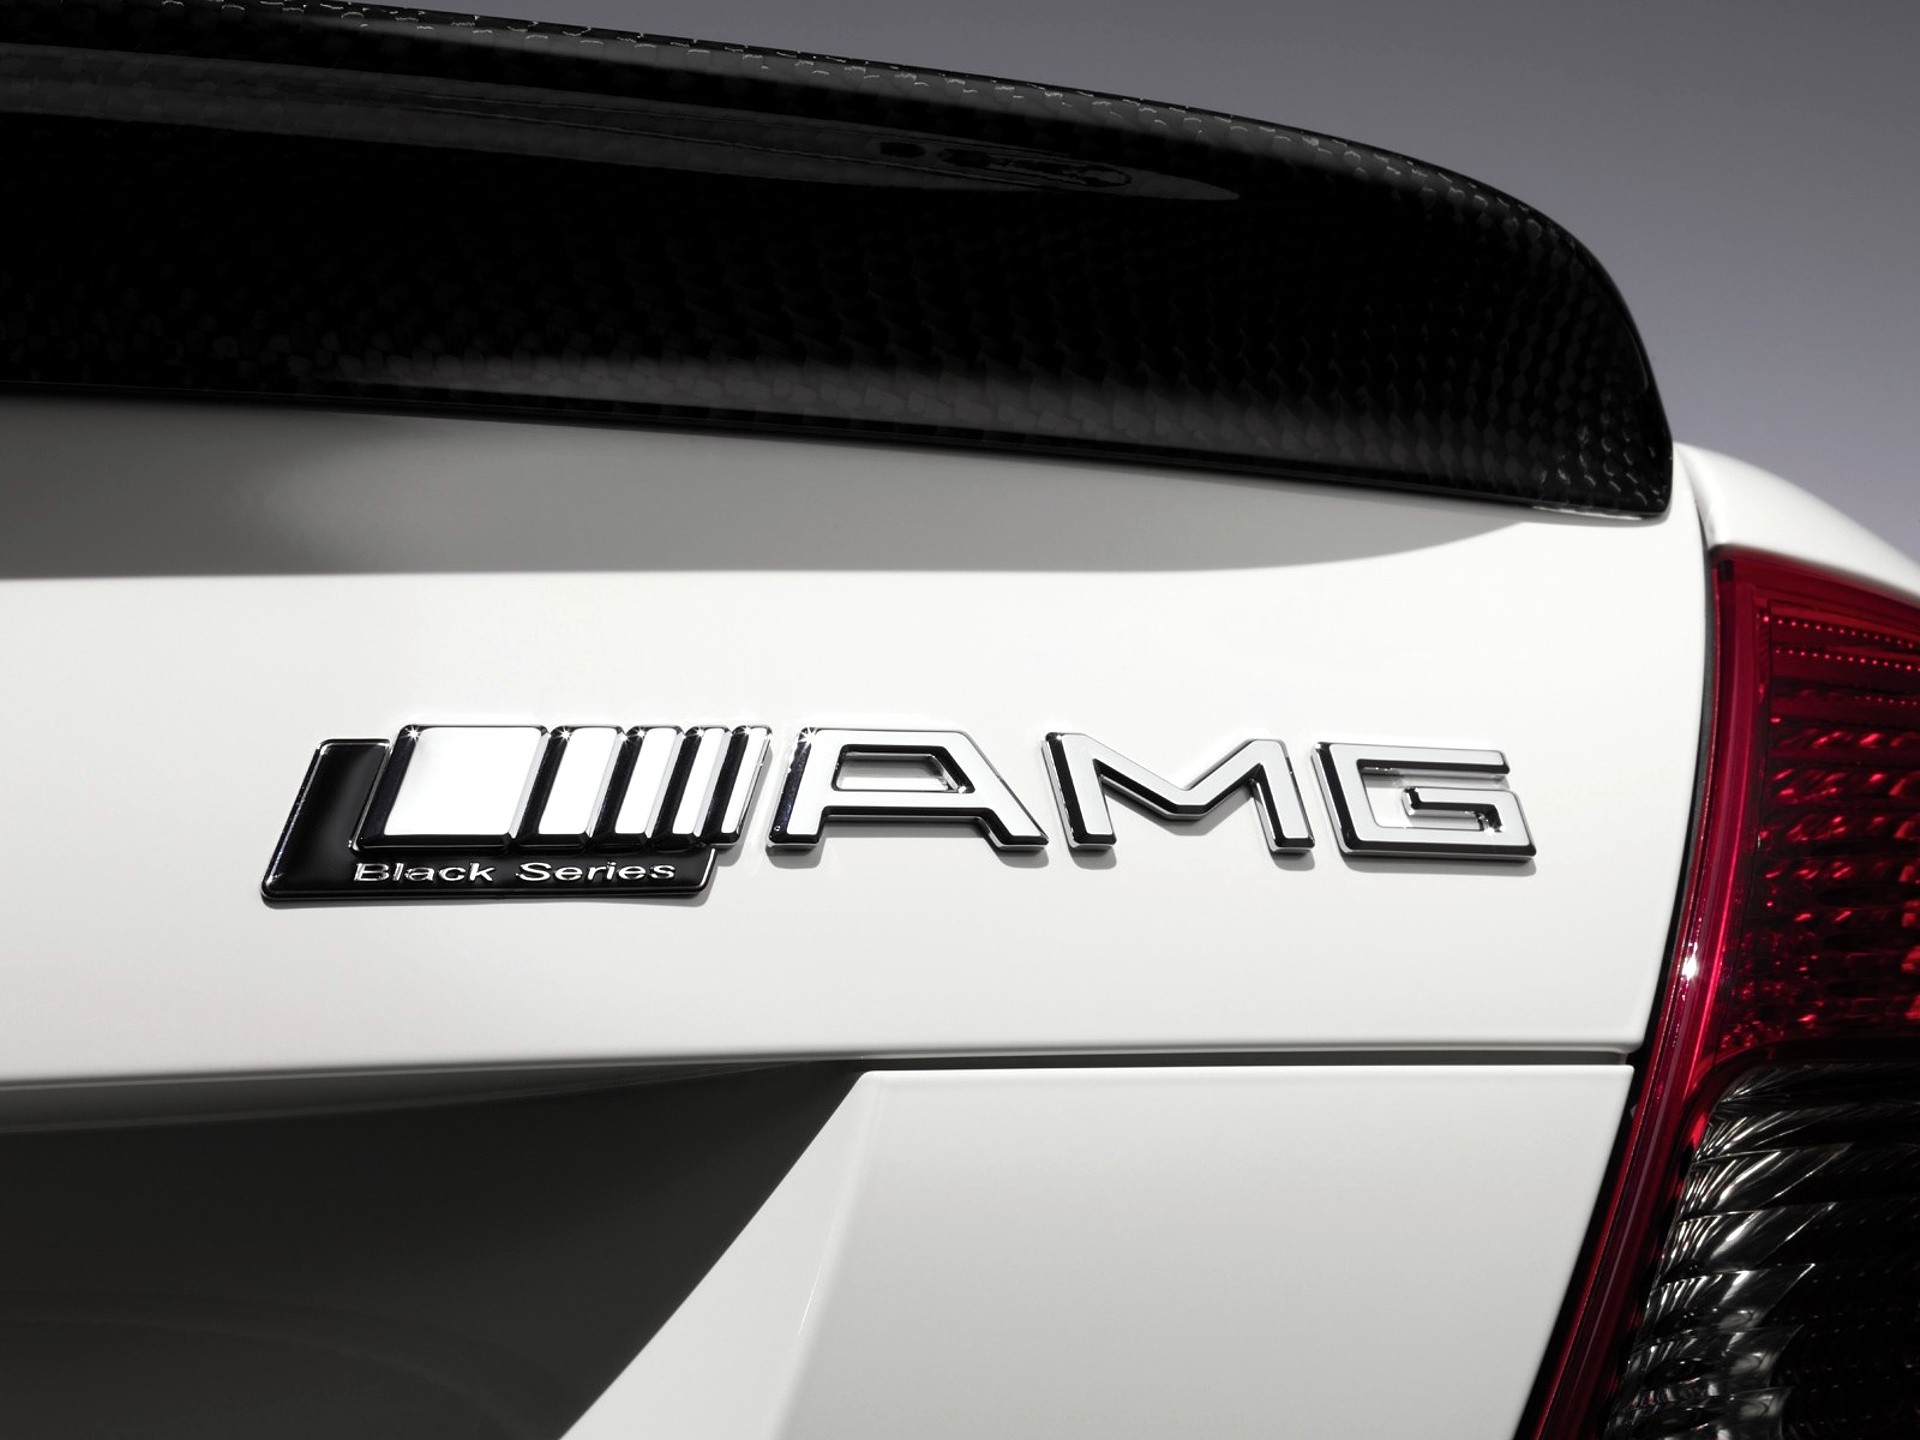 Mercedes Amg Logo Wallpapers From Www - Amg Logo On Car - HD Wallpaper 